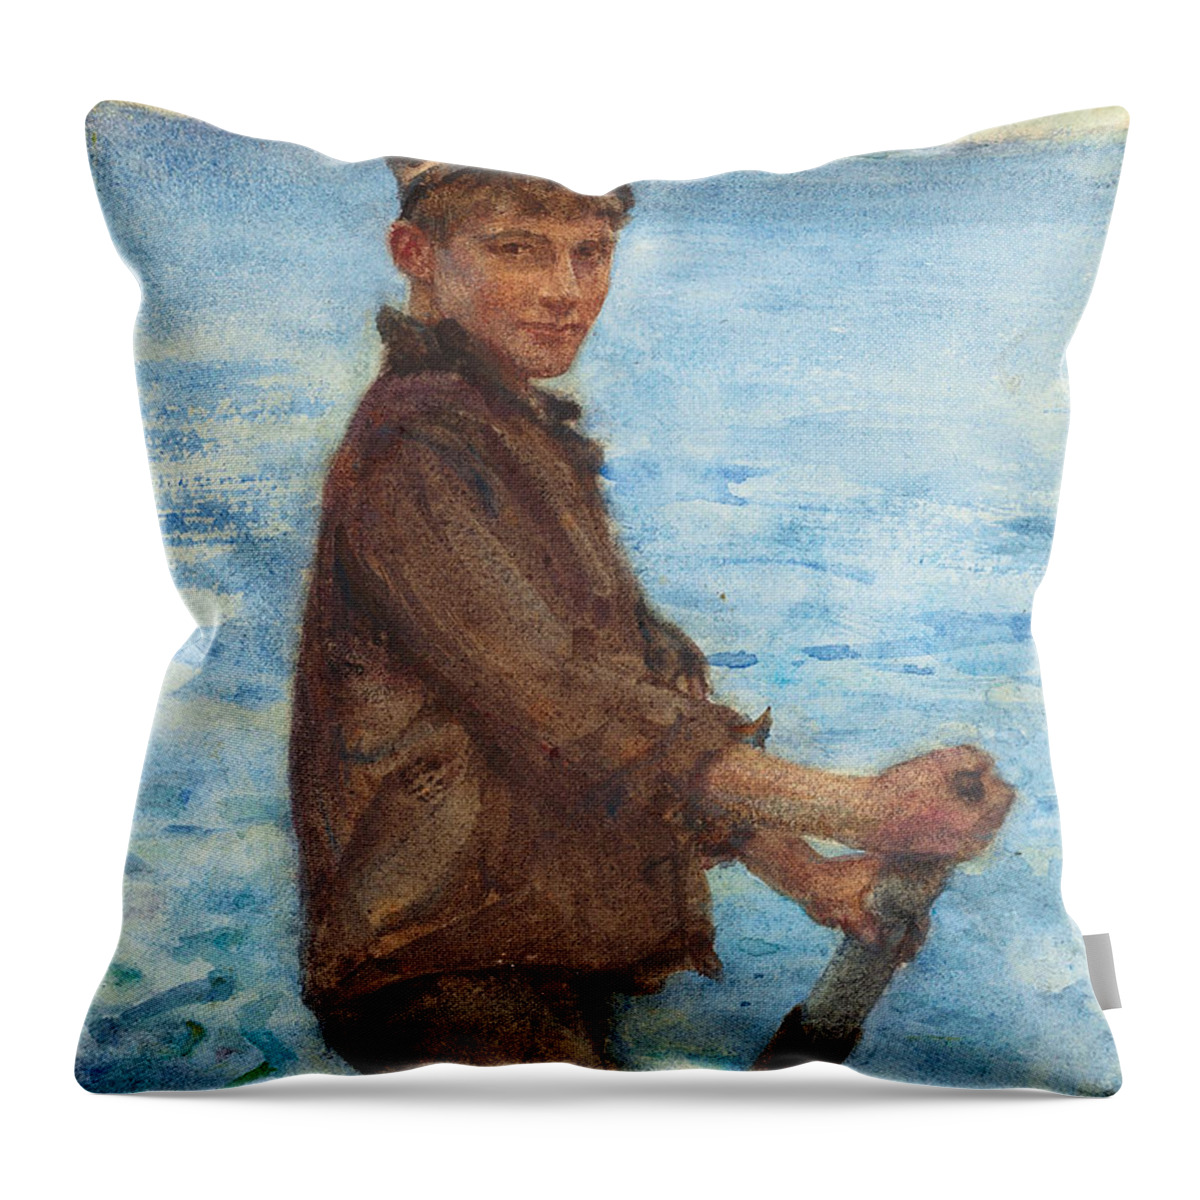 Boat Throw Pillow featuring the painting Steering The Punt, 1909 by Henry Scott Tuke